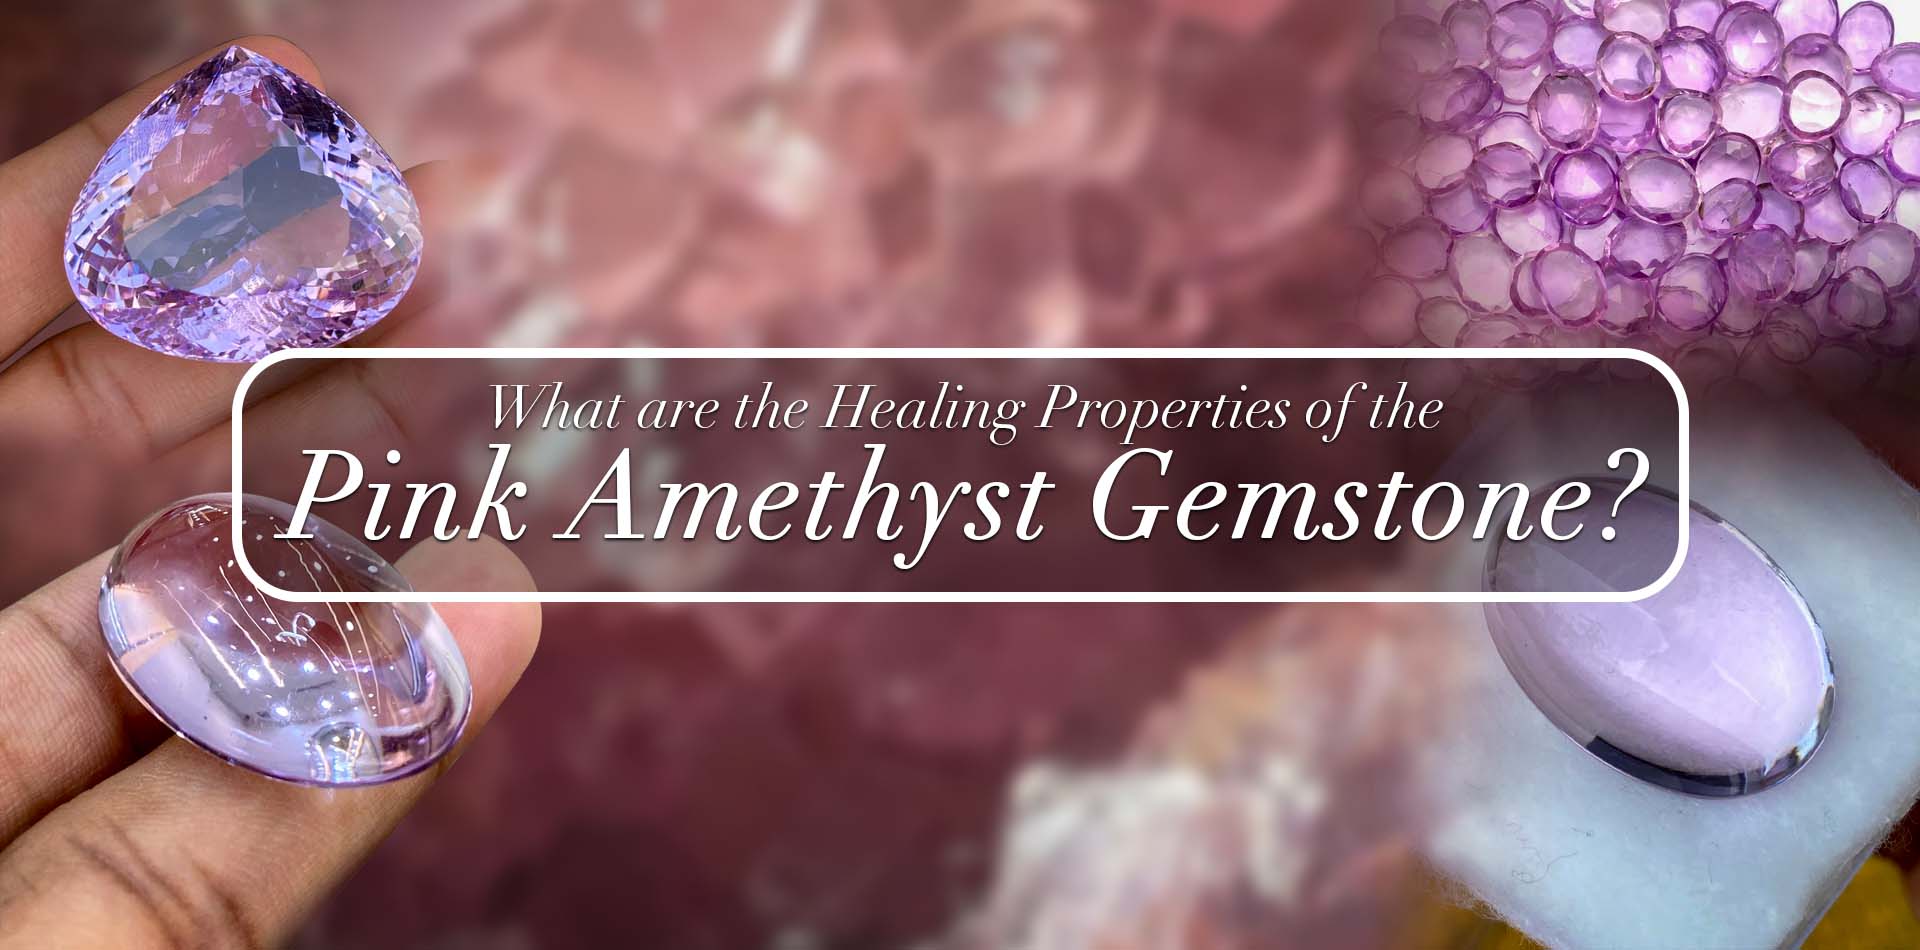 What Are The Healing Properties Of The Pink Amethyst Gemstone?